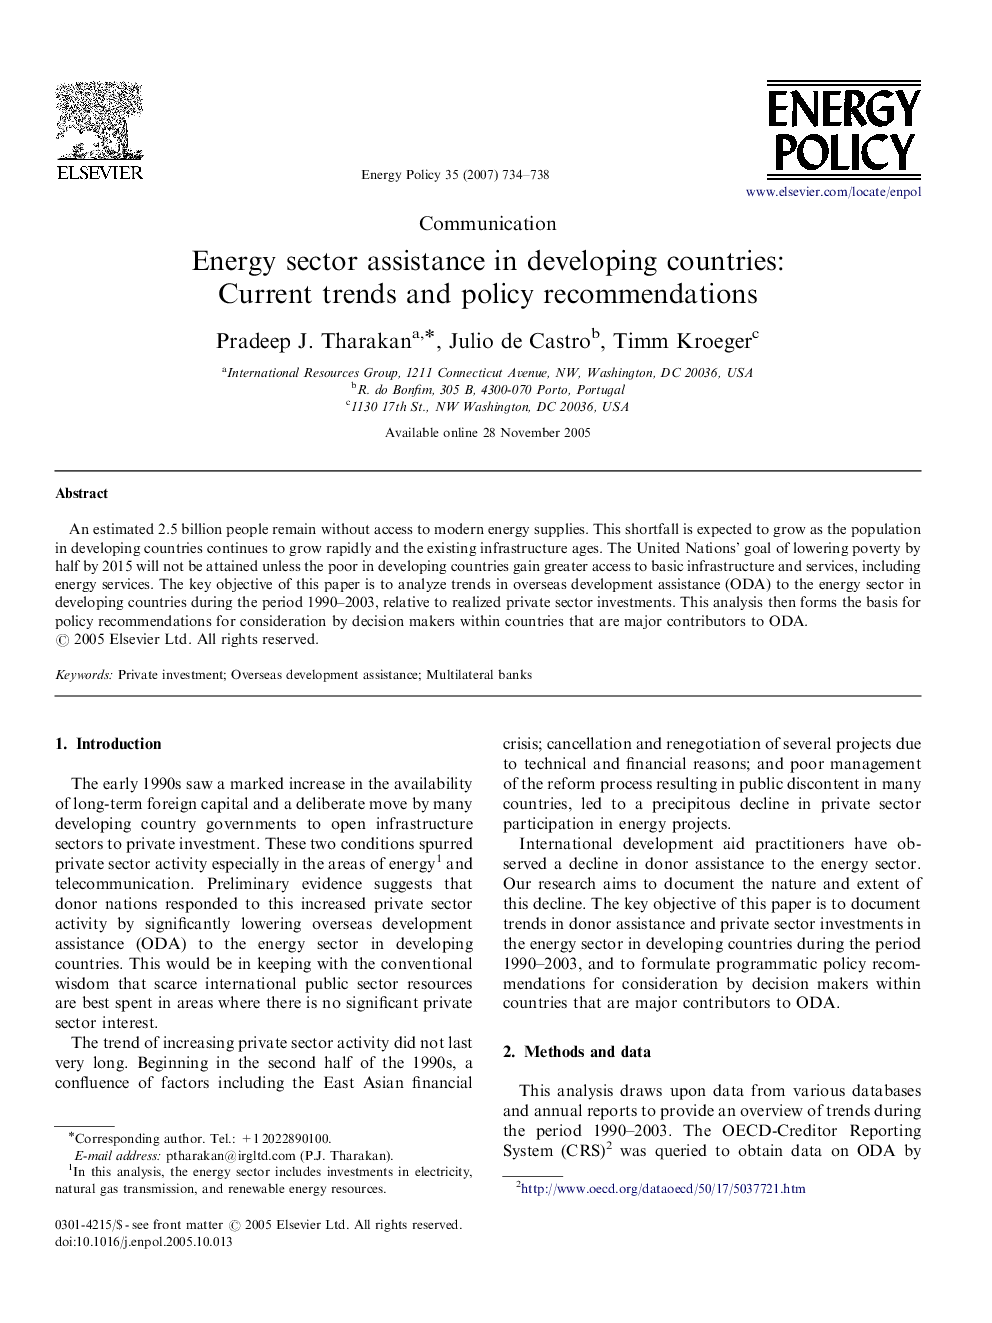 Energy sector assistance in developing countries: Current trends and policy recommendations